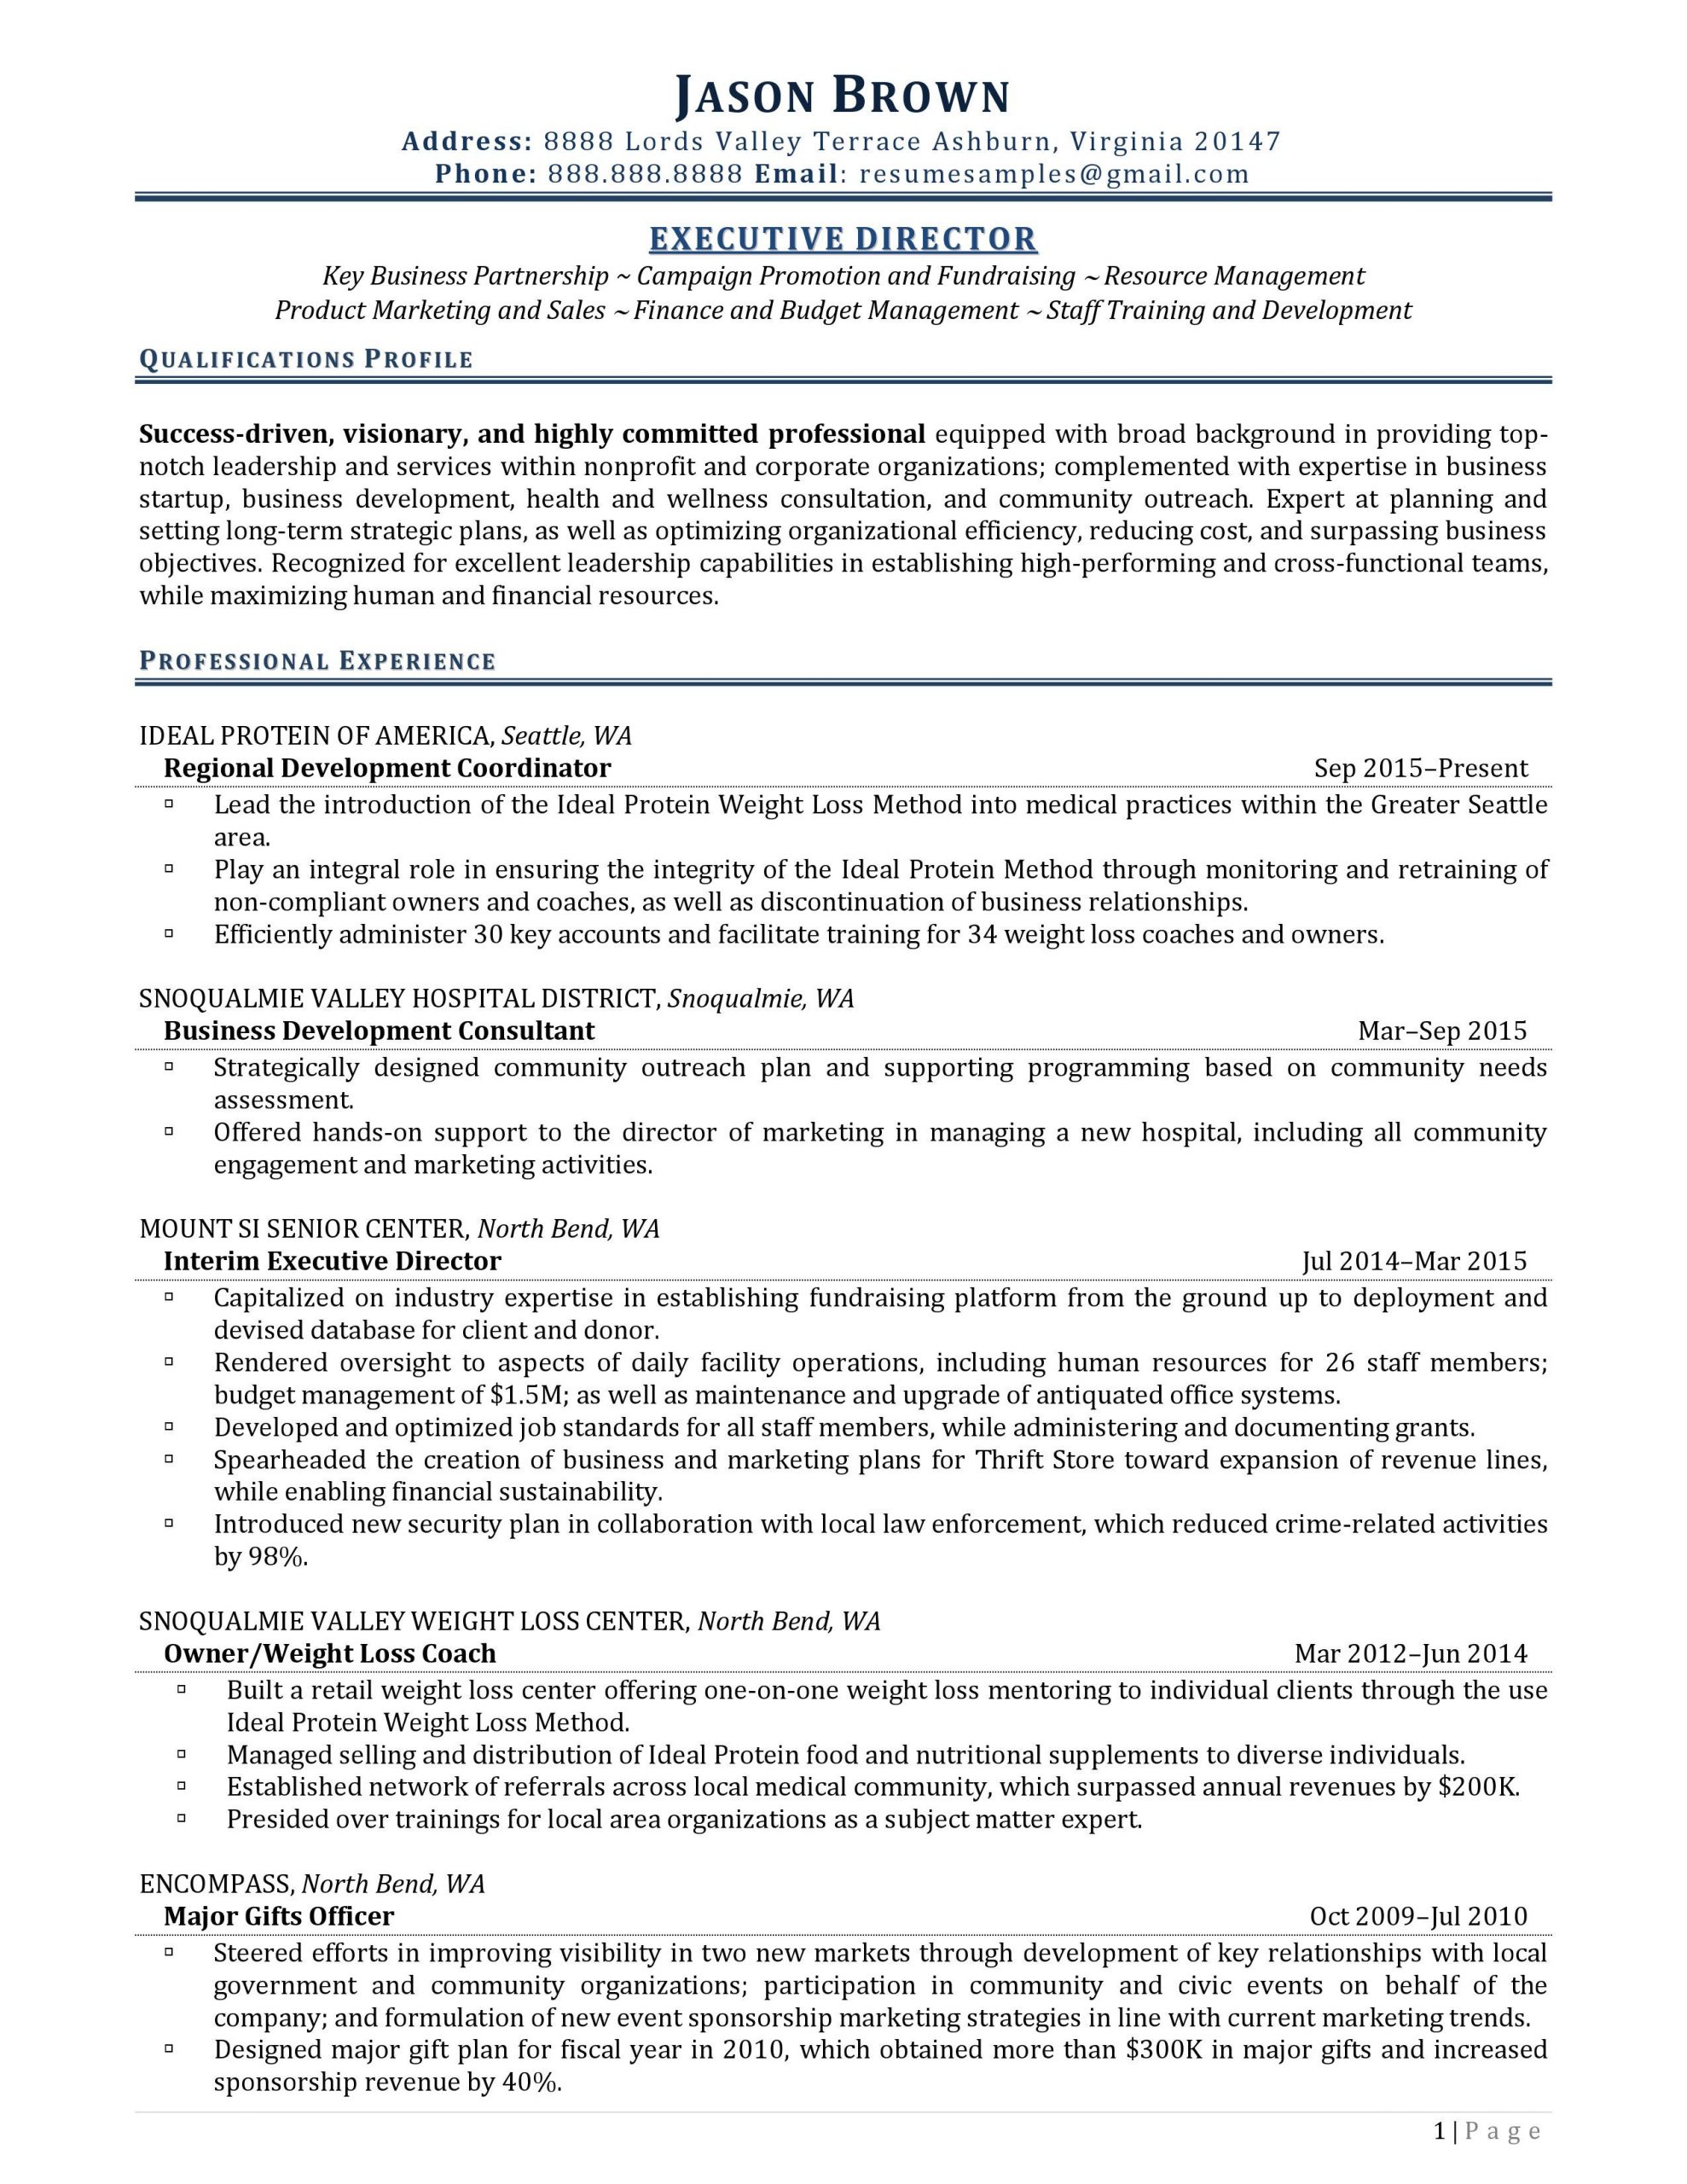 executive director resume examples